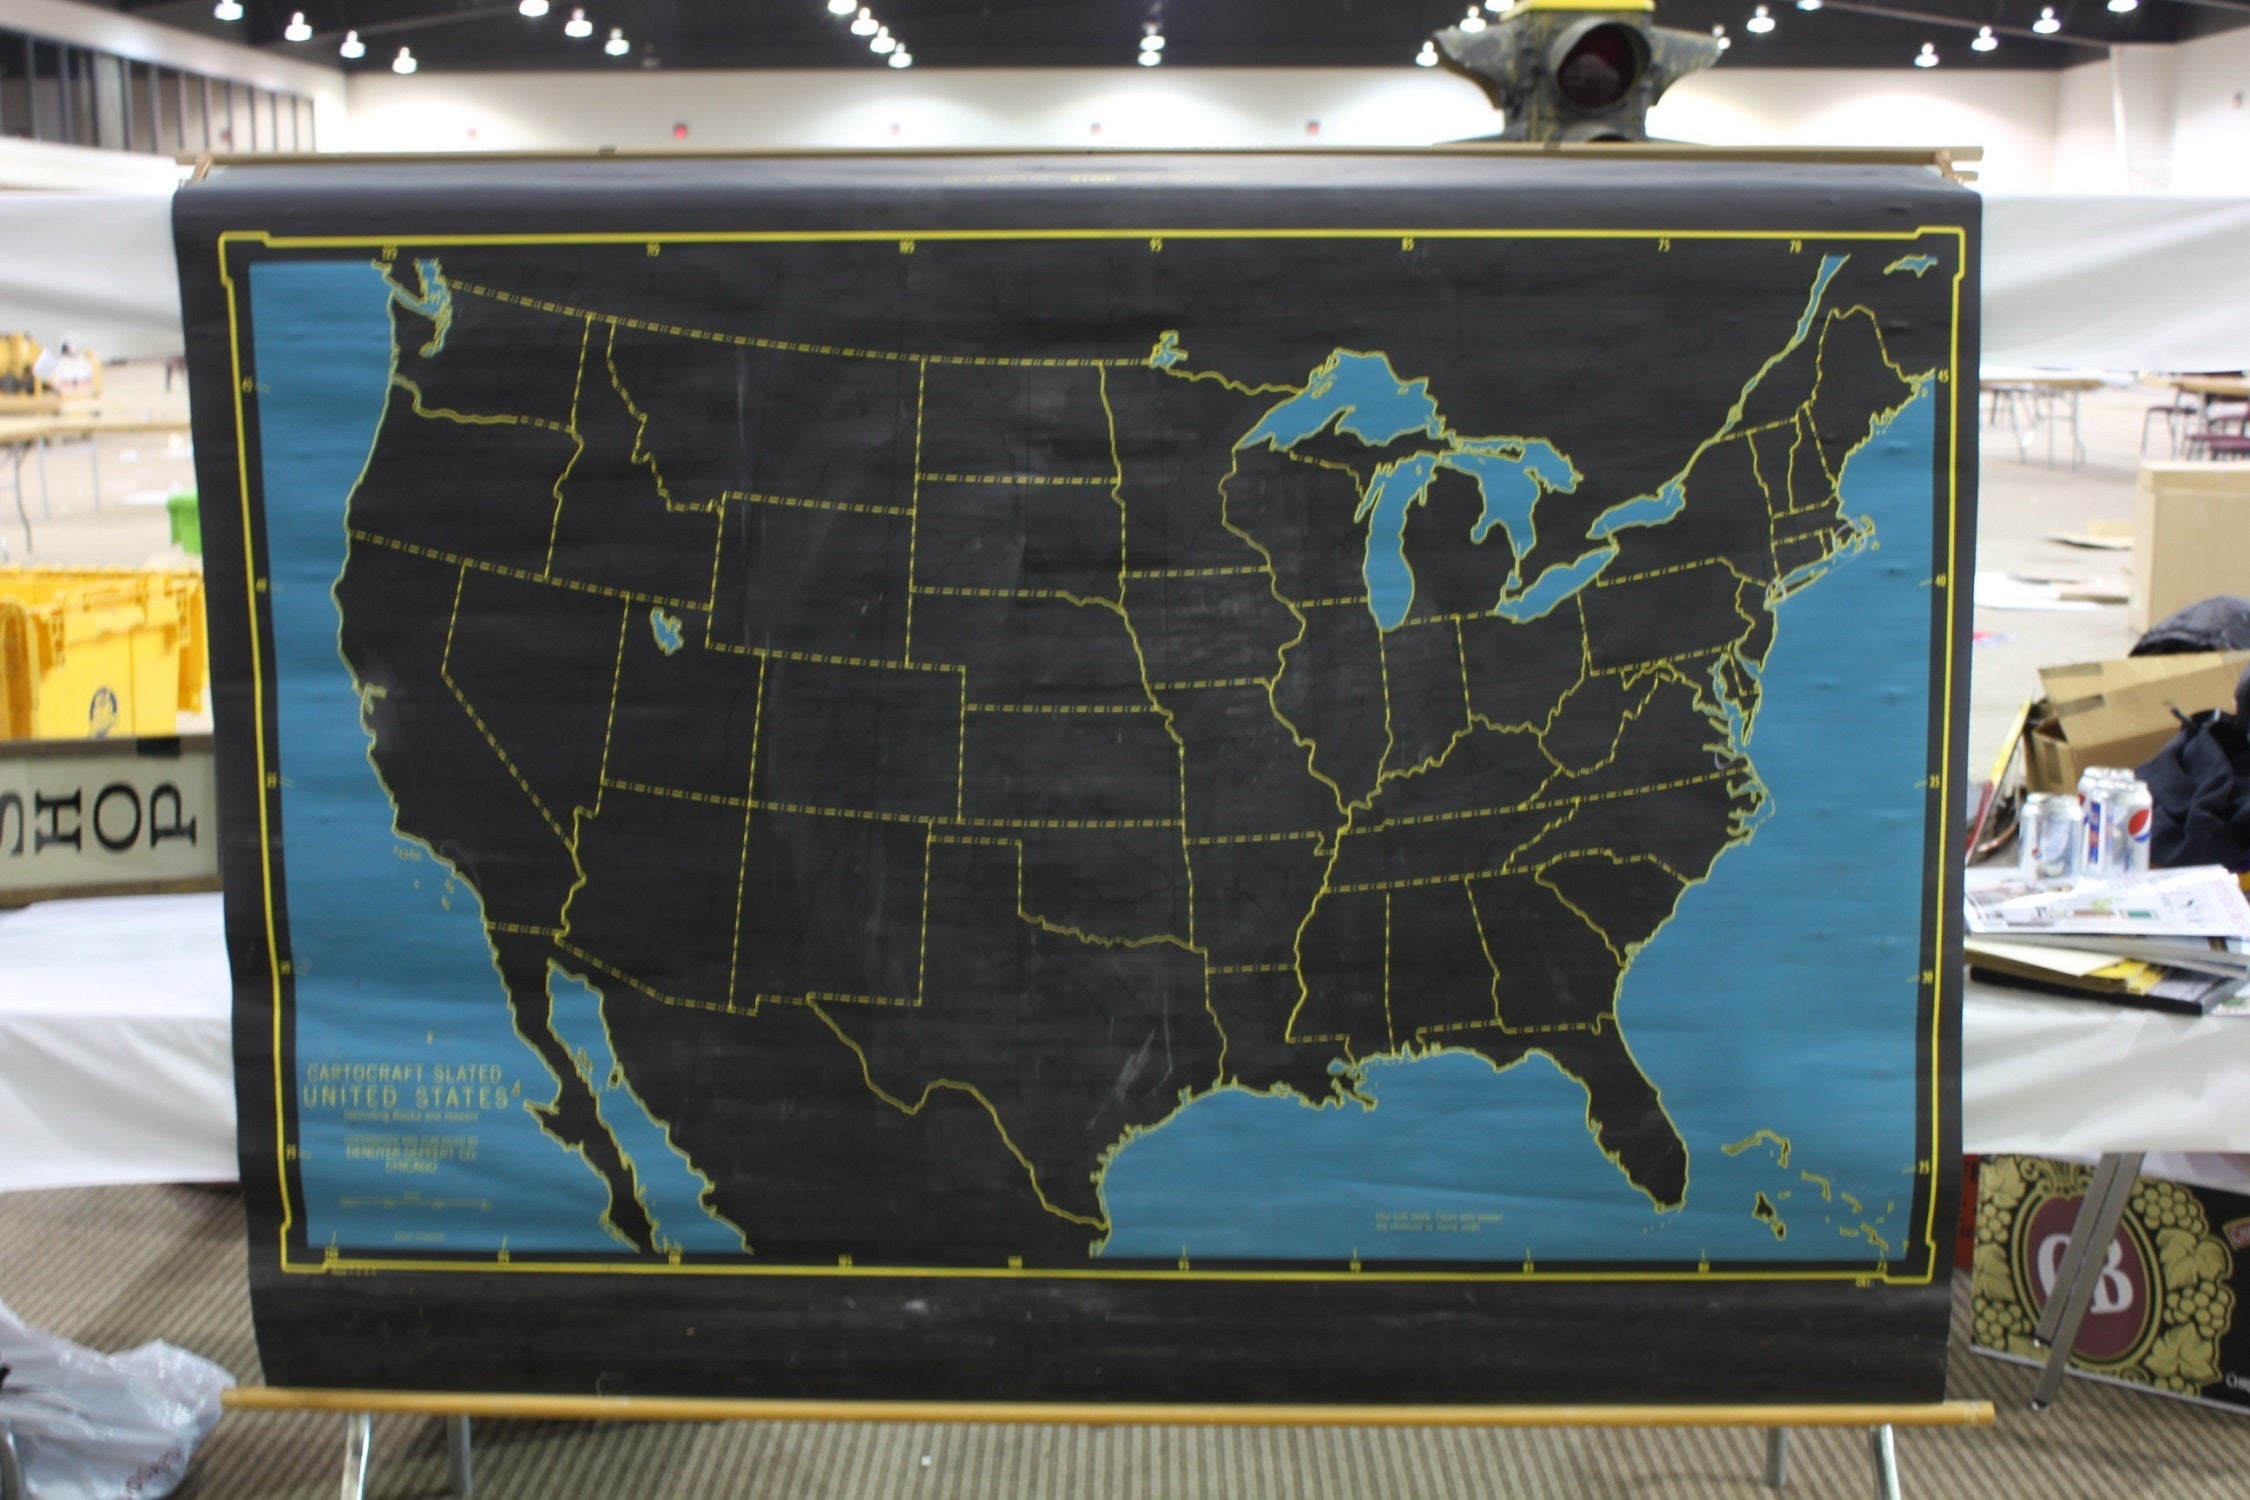 Vintage Pull Down Cartograph Slated Chalkboard Map by Denoyer & Geppert Co For Sale